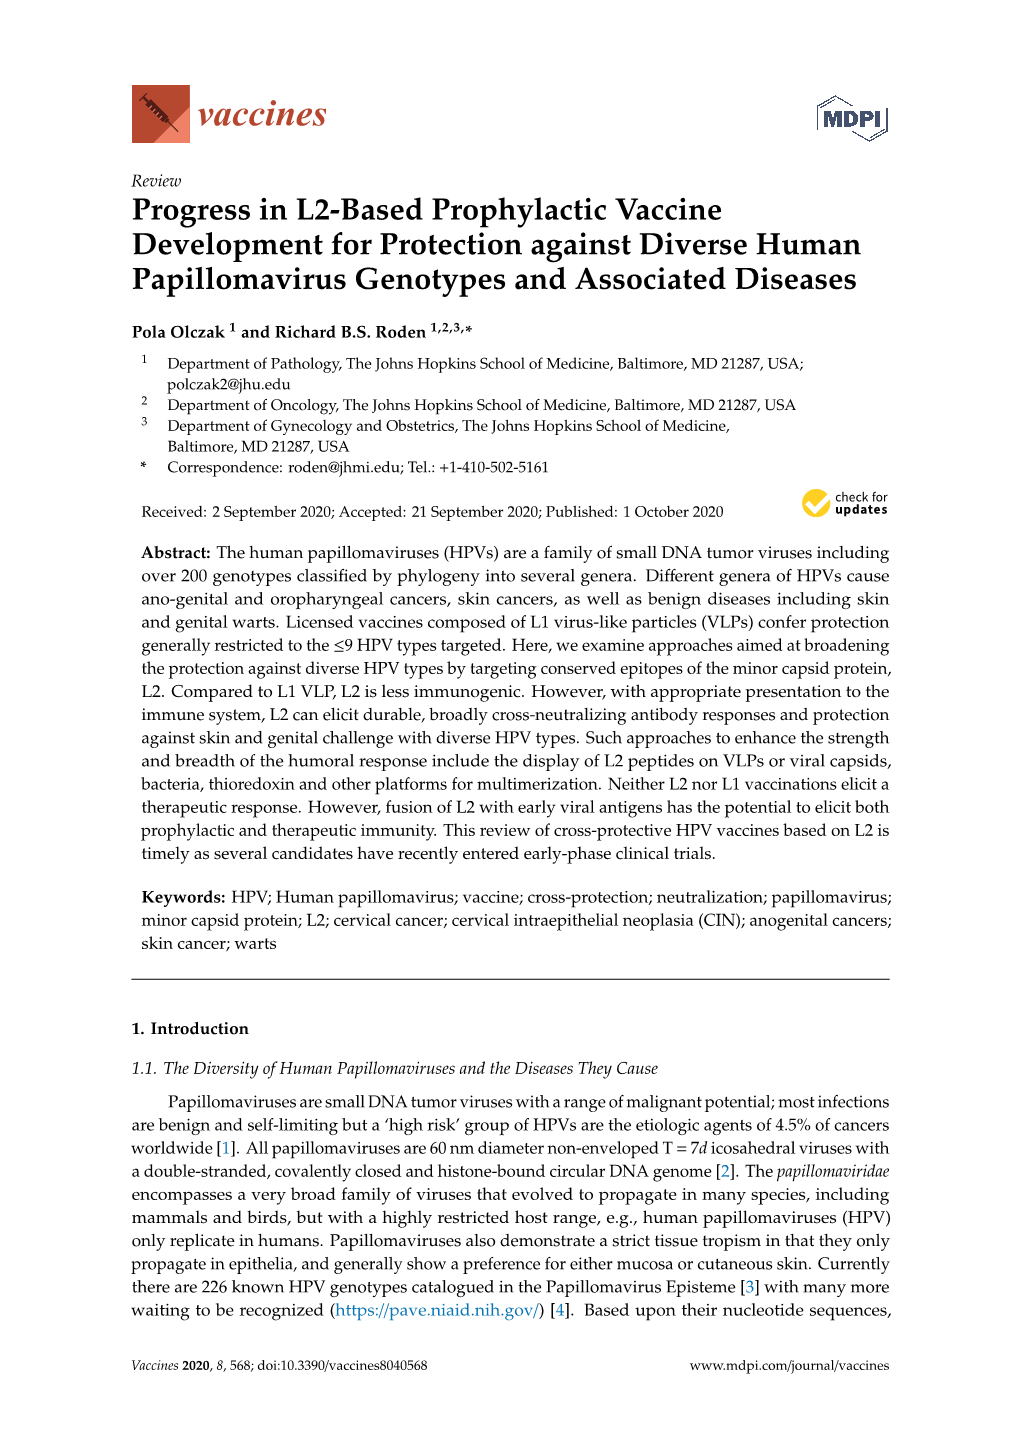 Progress in L2-Based Prophylactic Vaccine Development for Protection Against Diverse Human Papillomavirus Genotypes and Associated Diseases